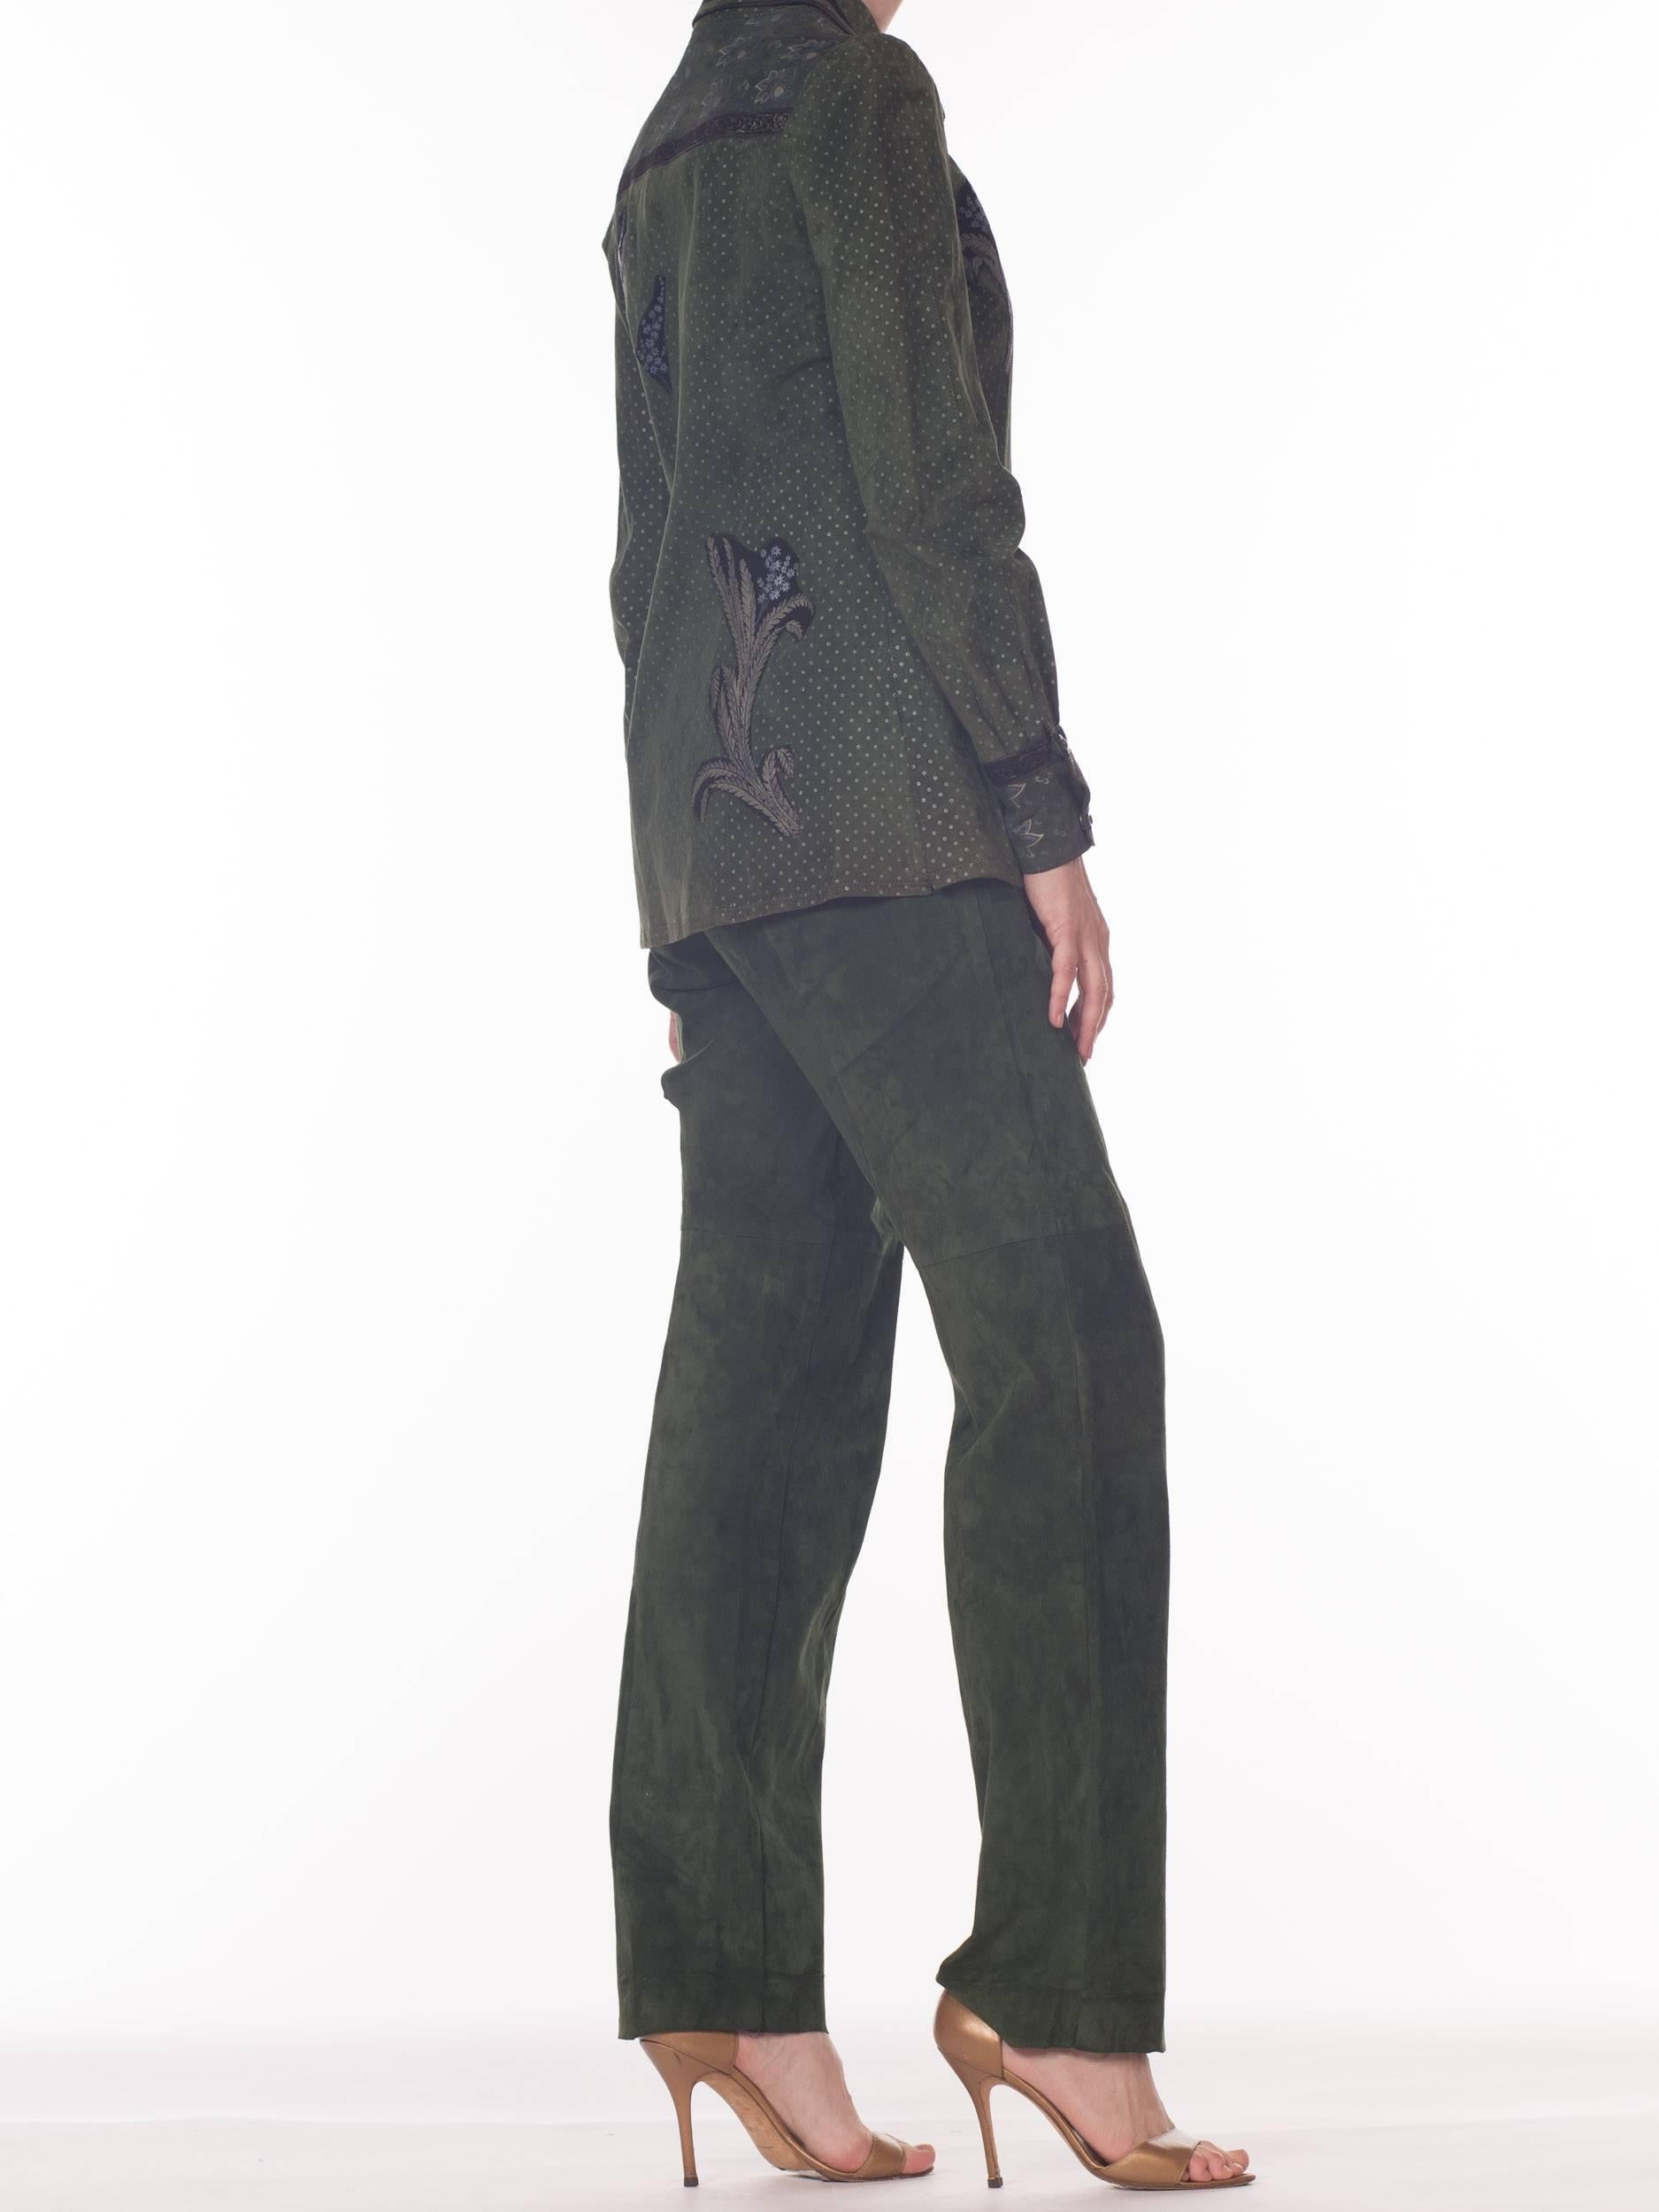 Women's Roberto Cavalli Green Suede Pants and Jacket Set with Printed Panels 